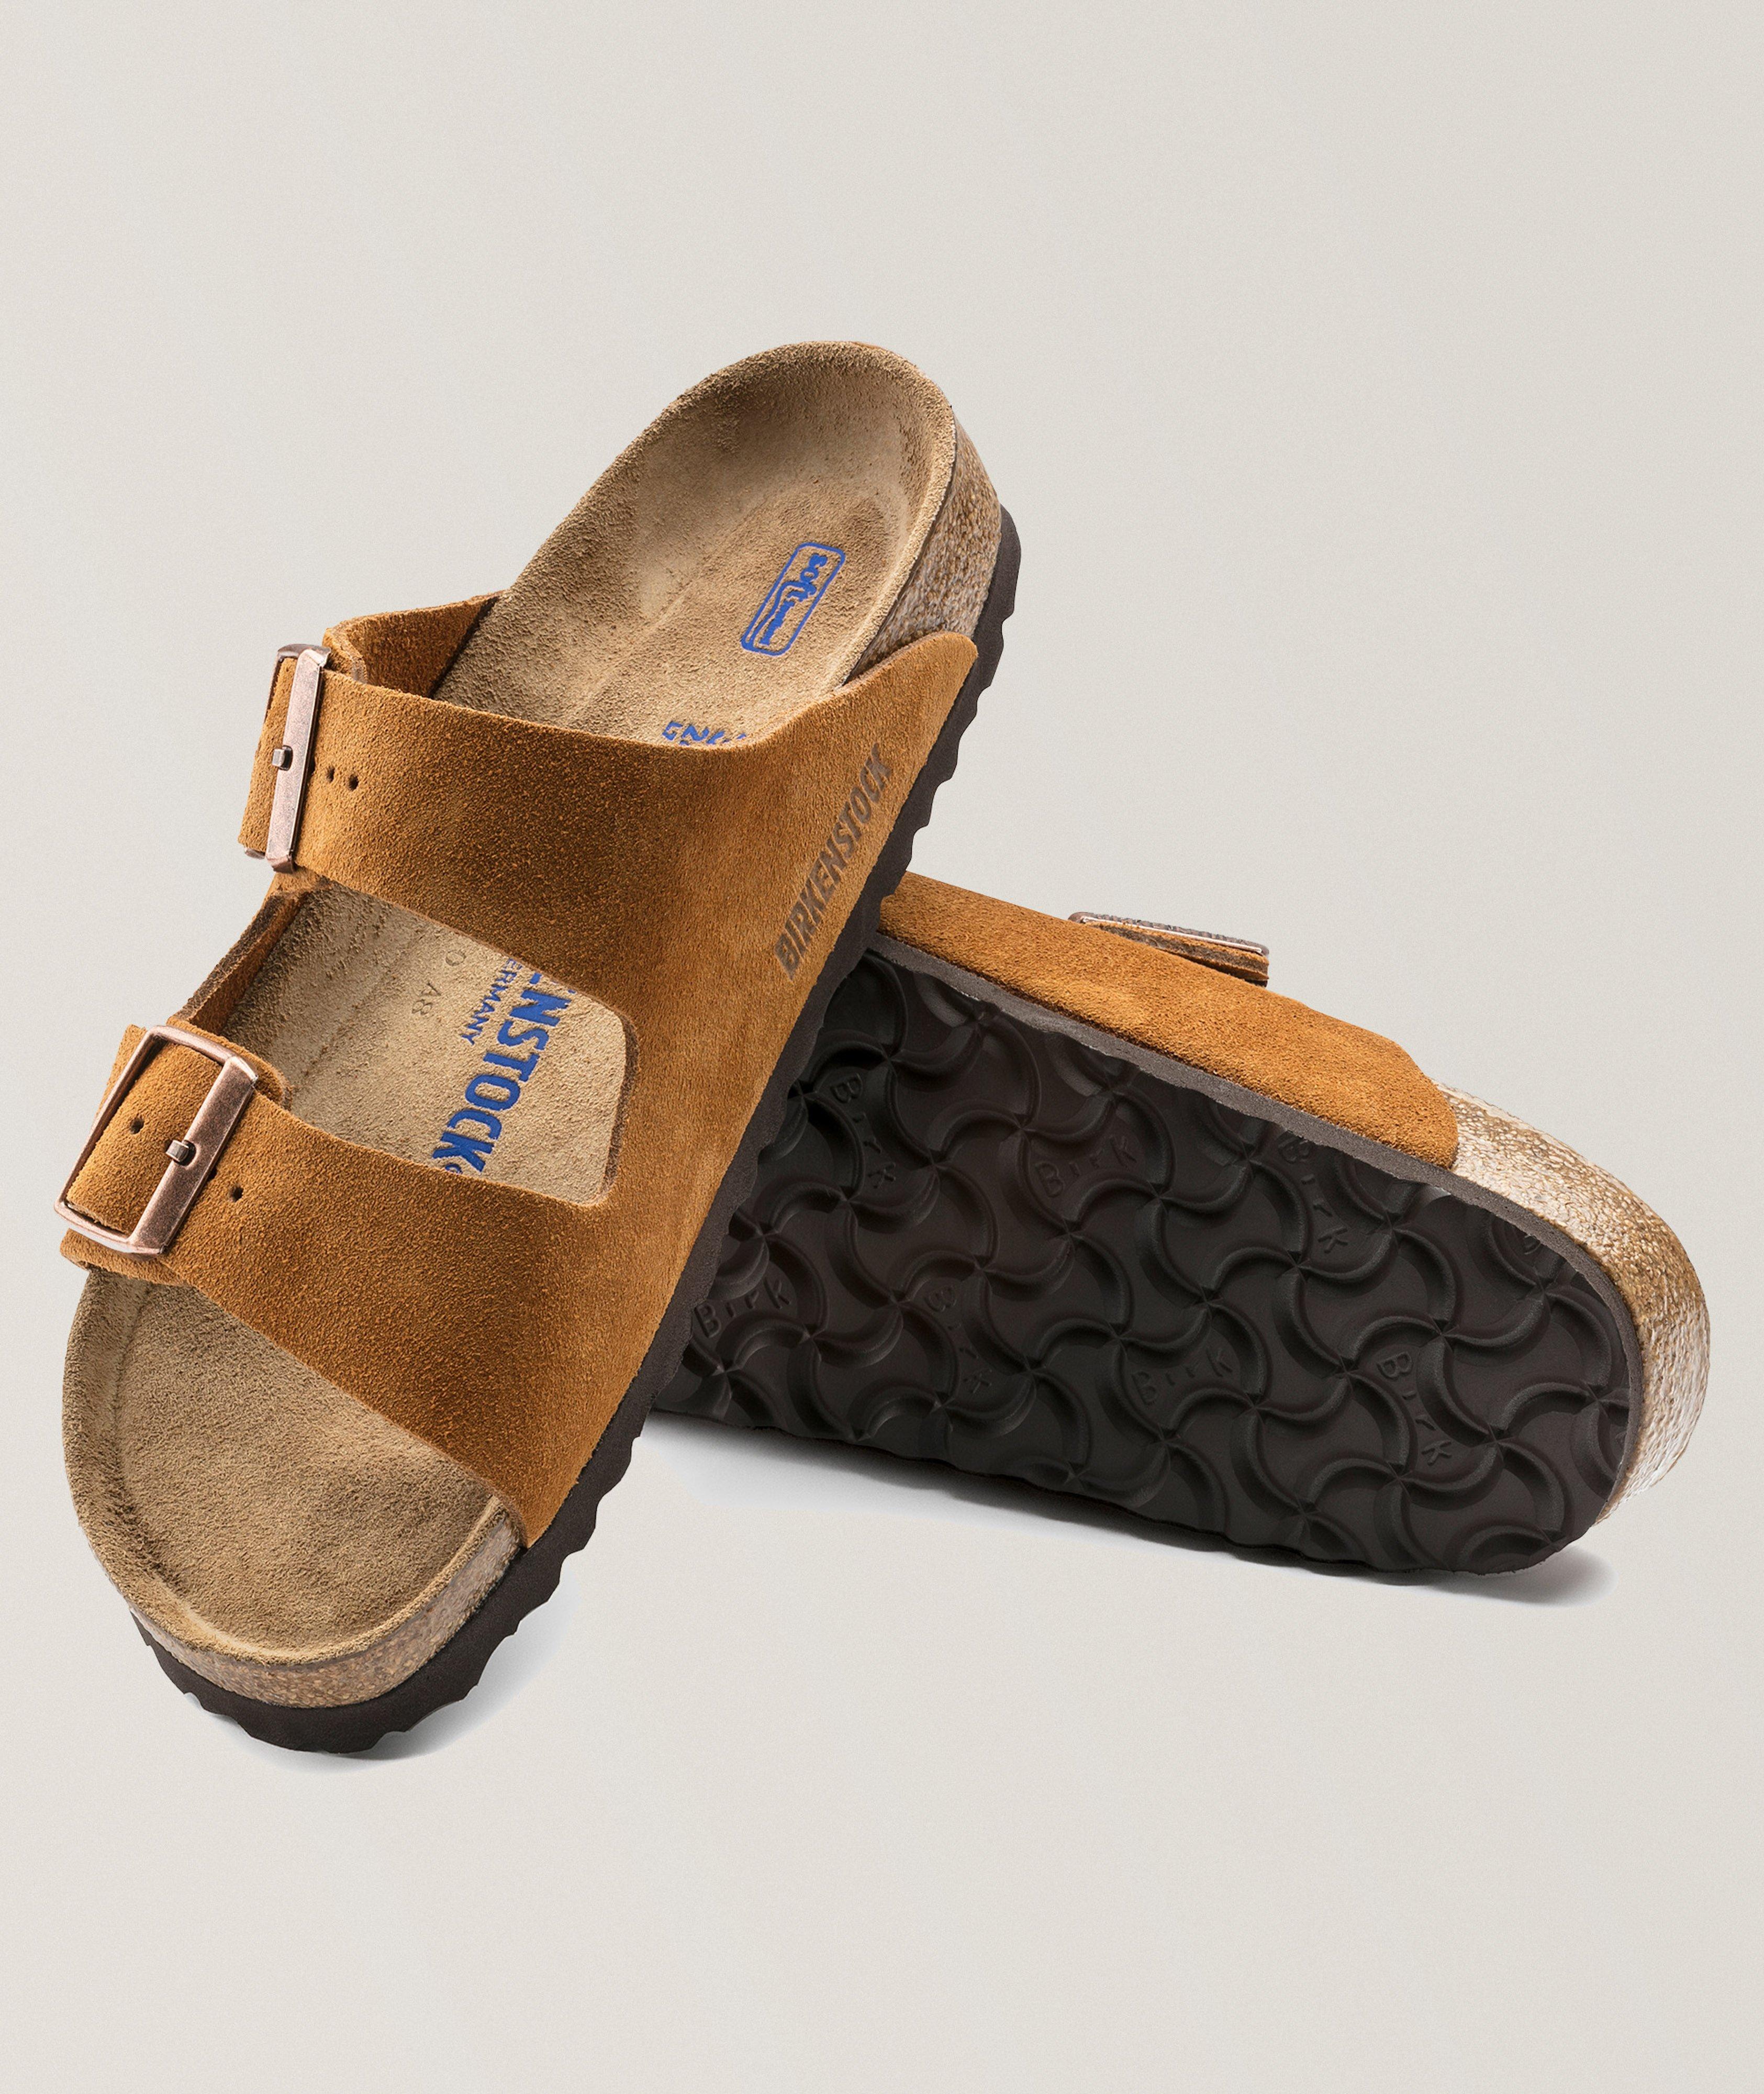 Arizona Suede Soft Footbed Sandals